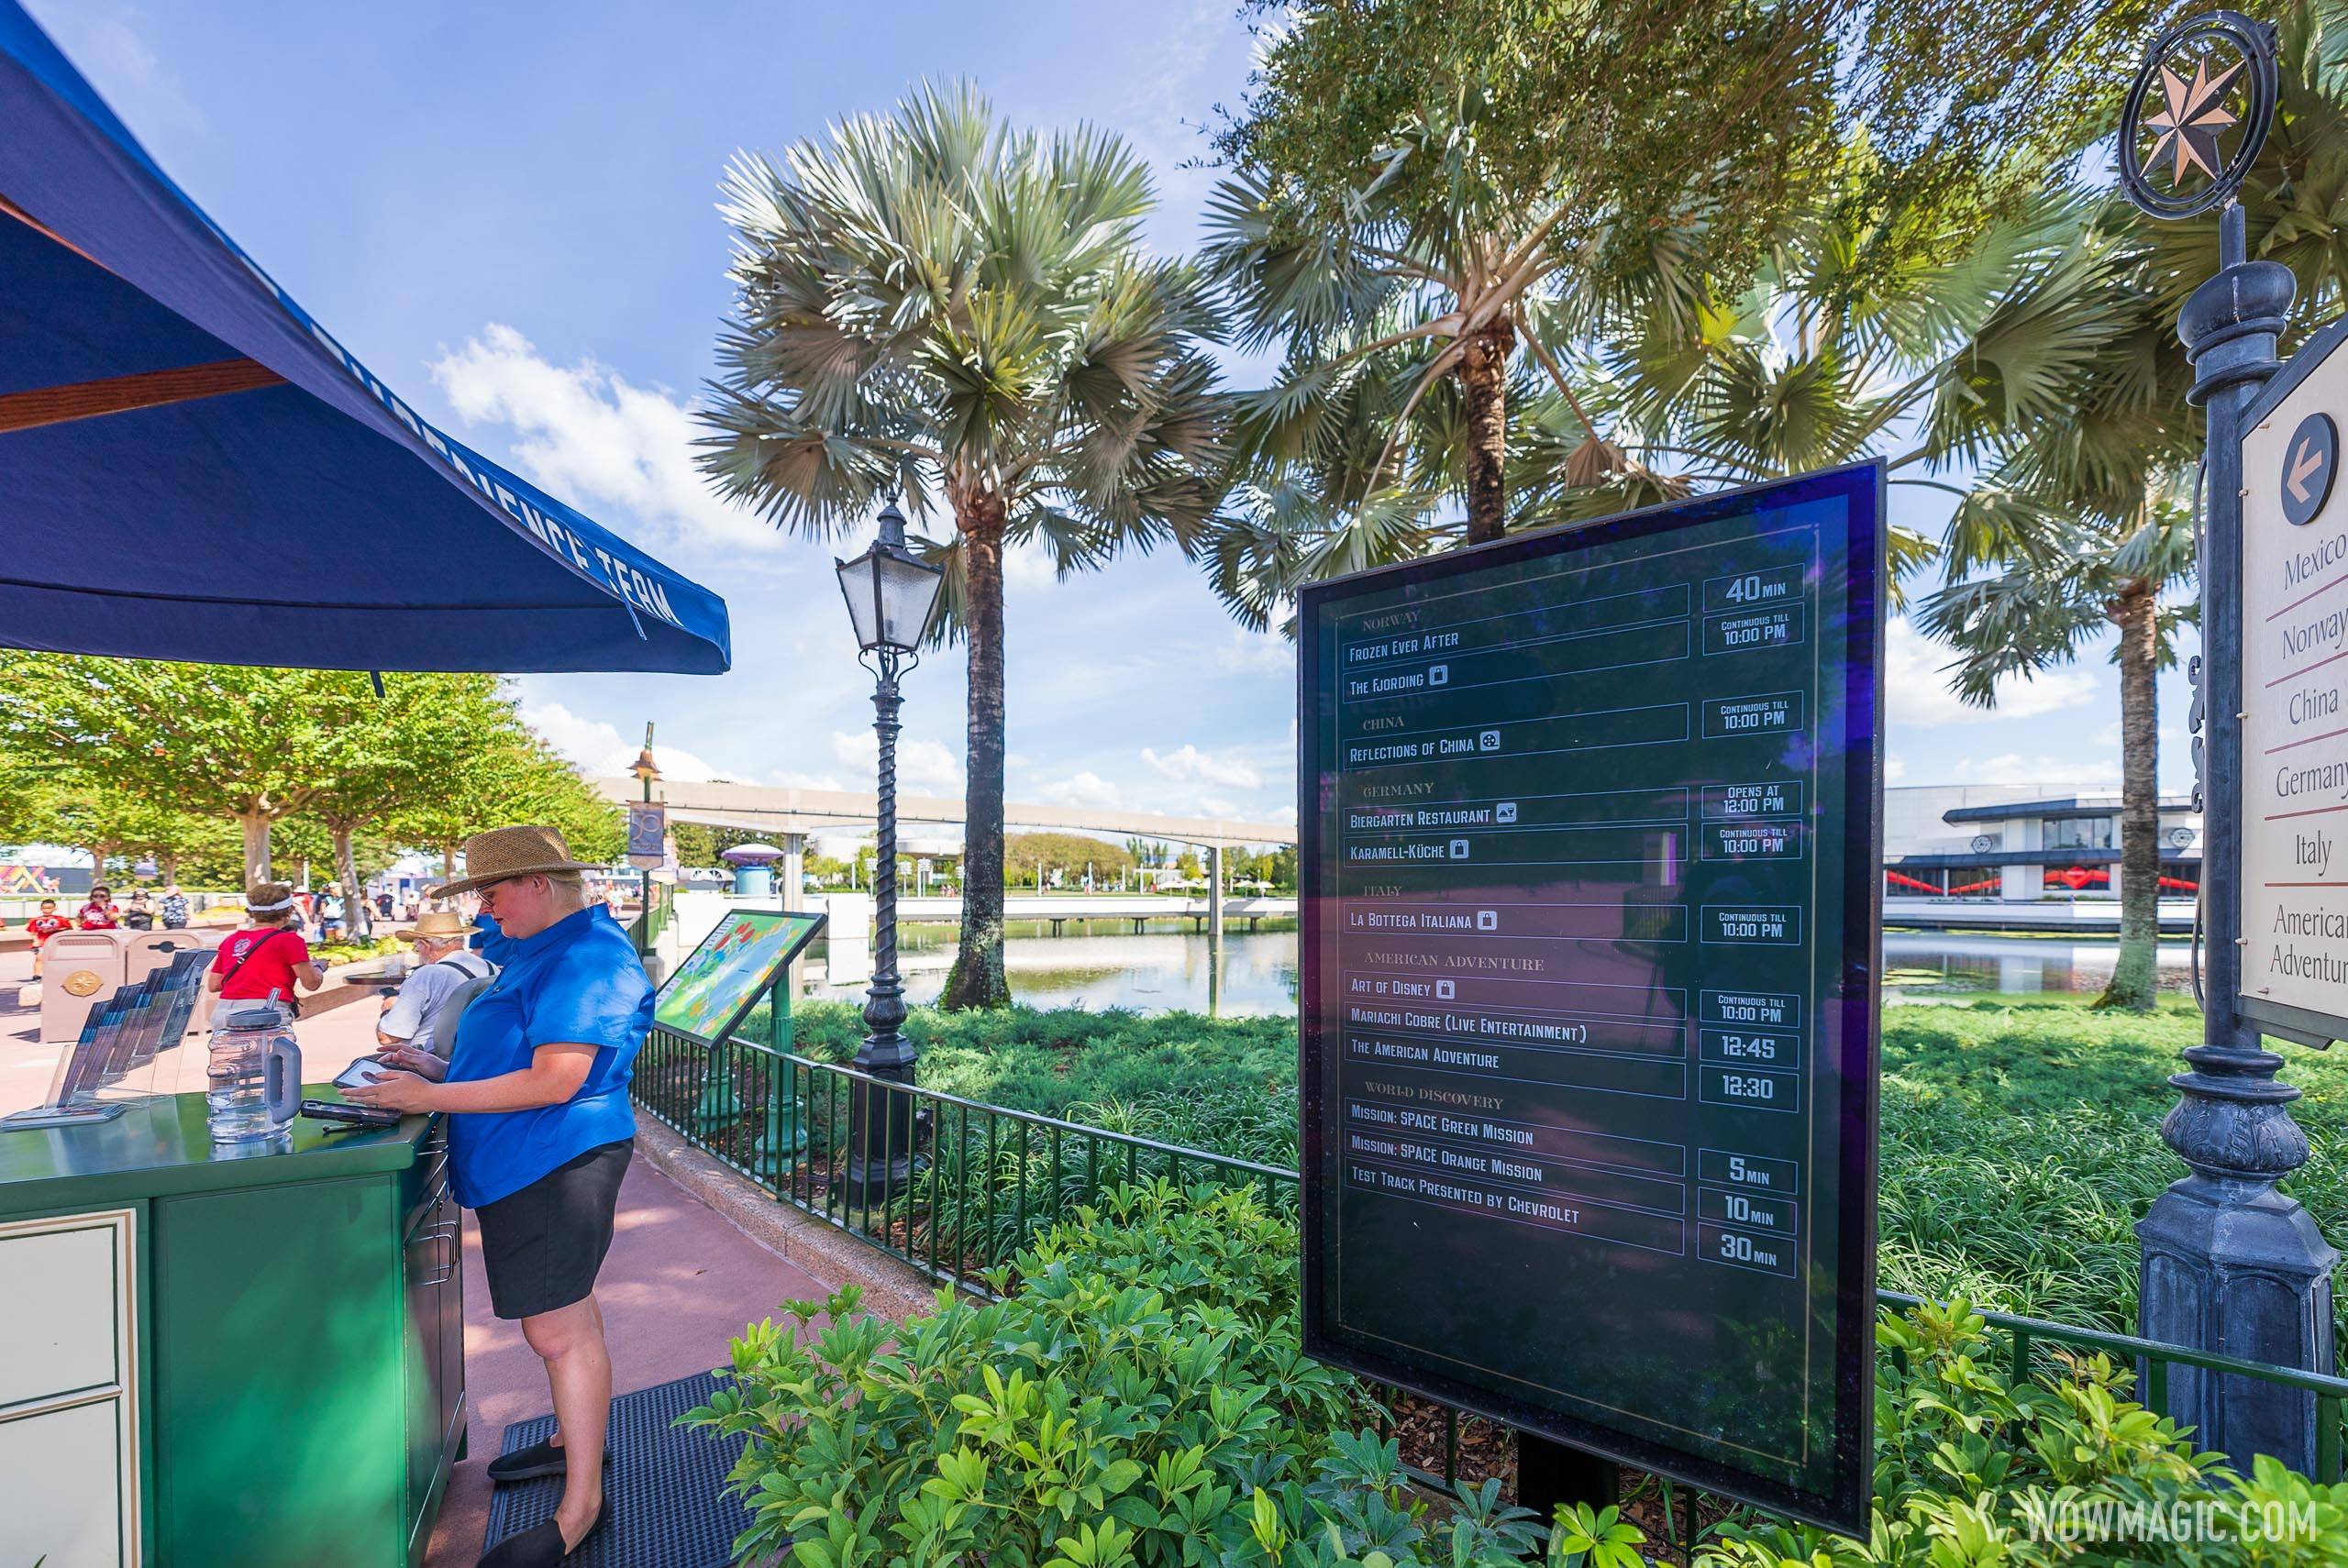 Digital tip boards come to EPCOT